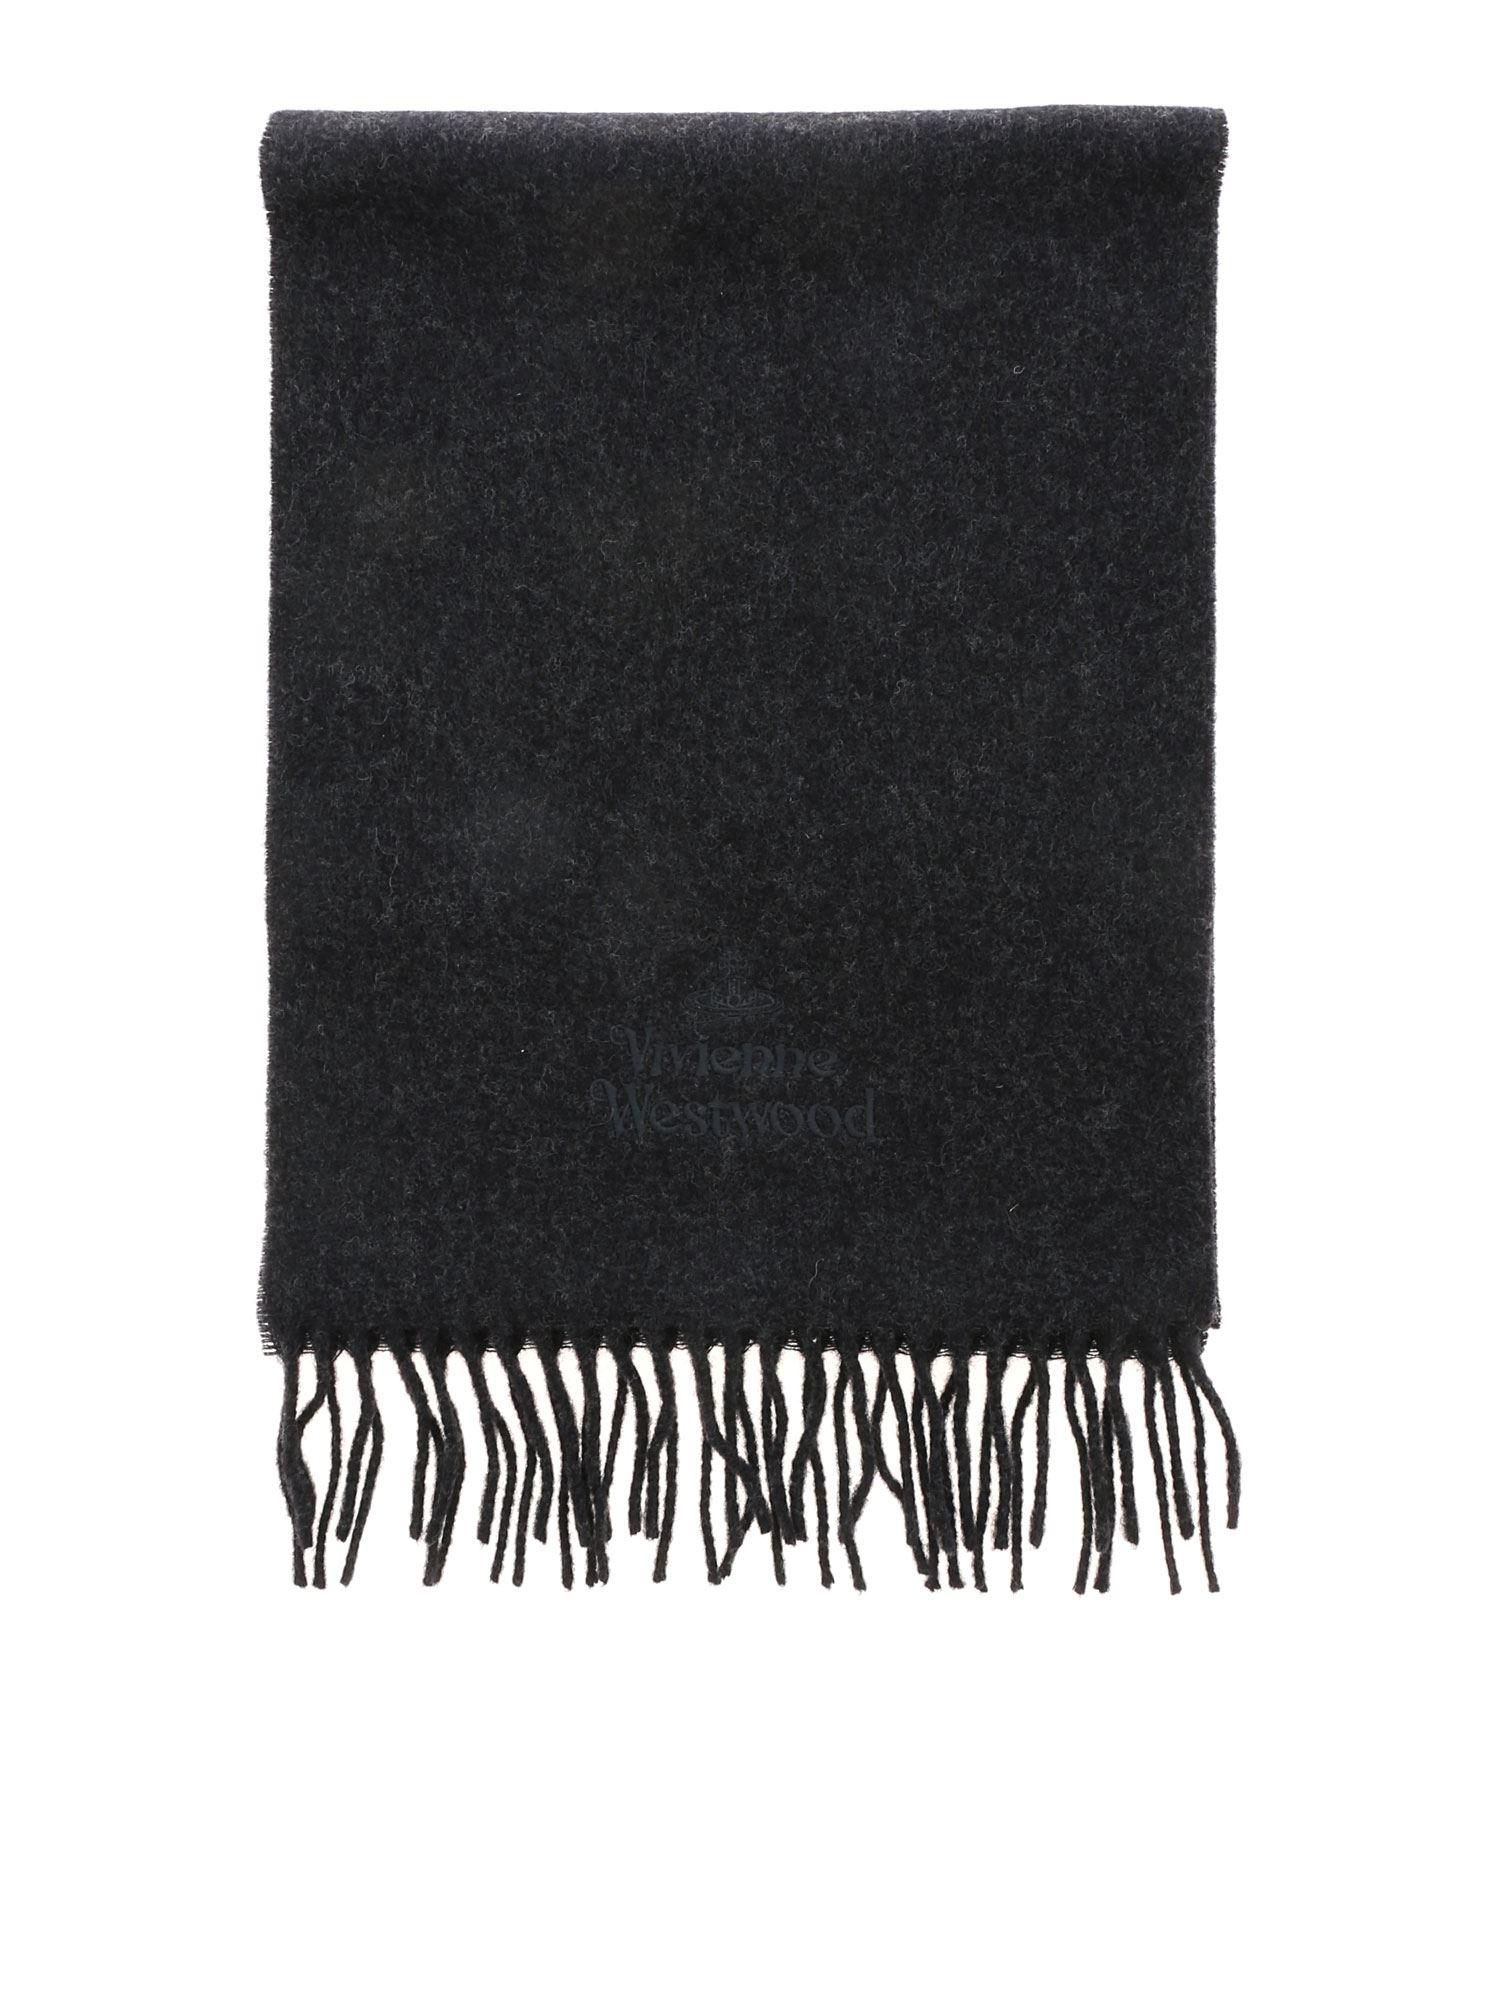 Vivienne Westwood Embroidered Logo Scarf in Grey (Gray) for Men - Lyst